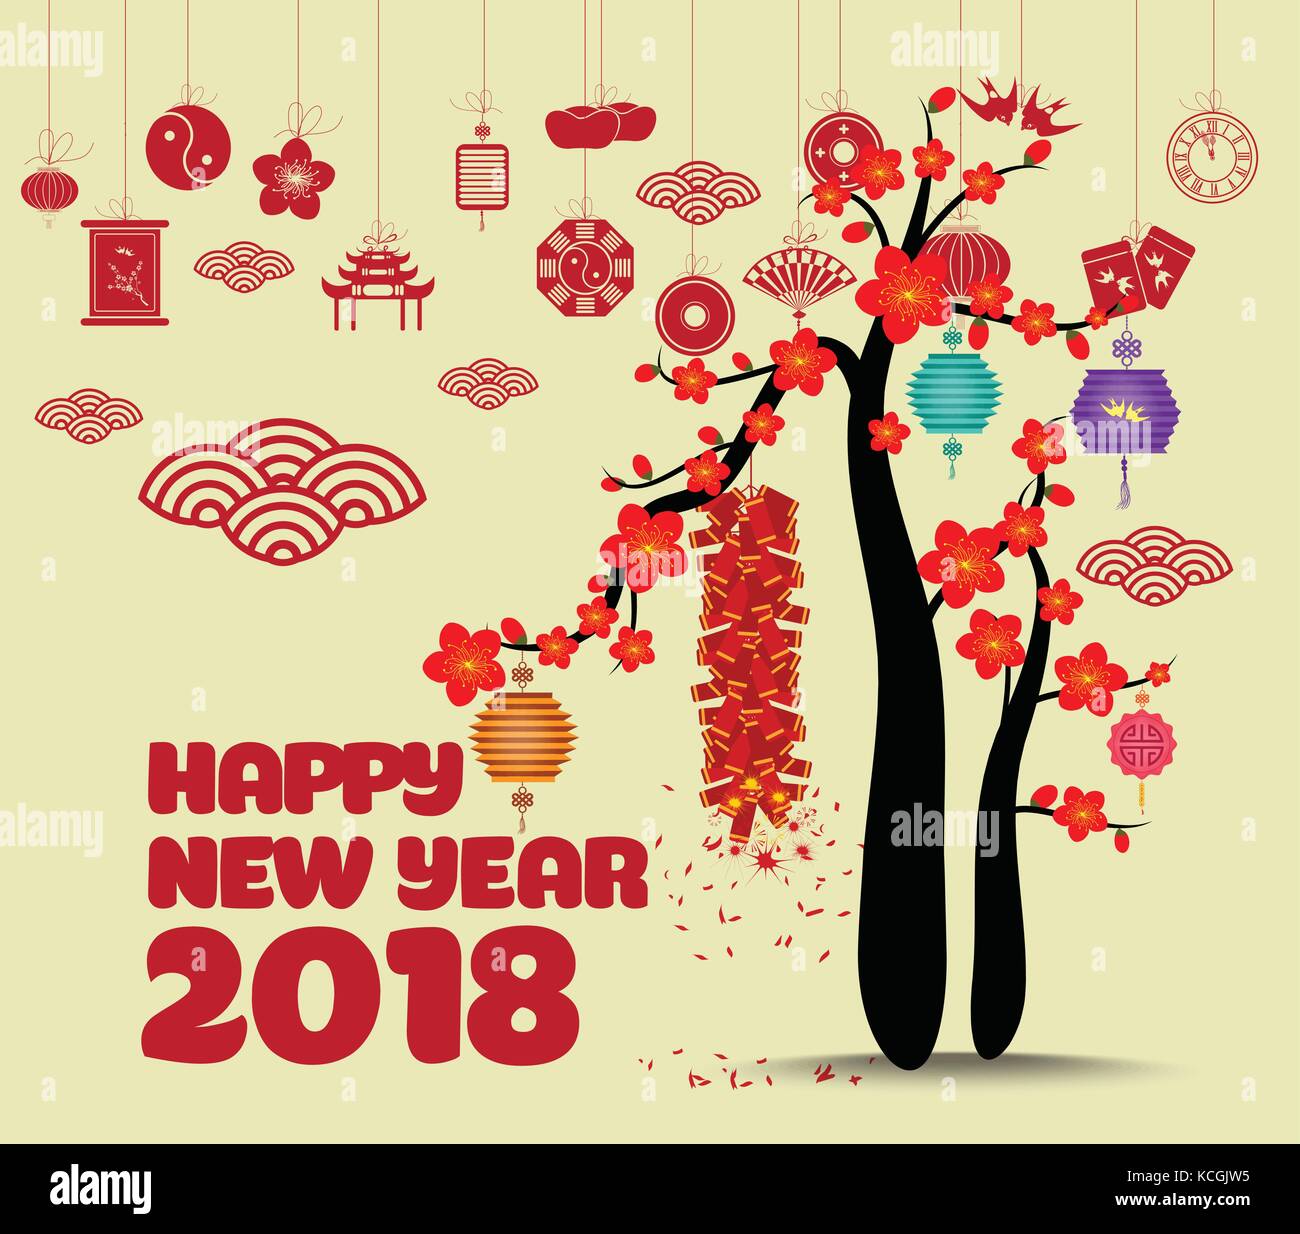 Chinese new year with blossom and firecracker Stock Vector